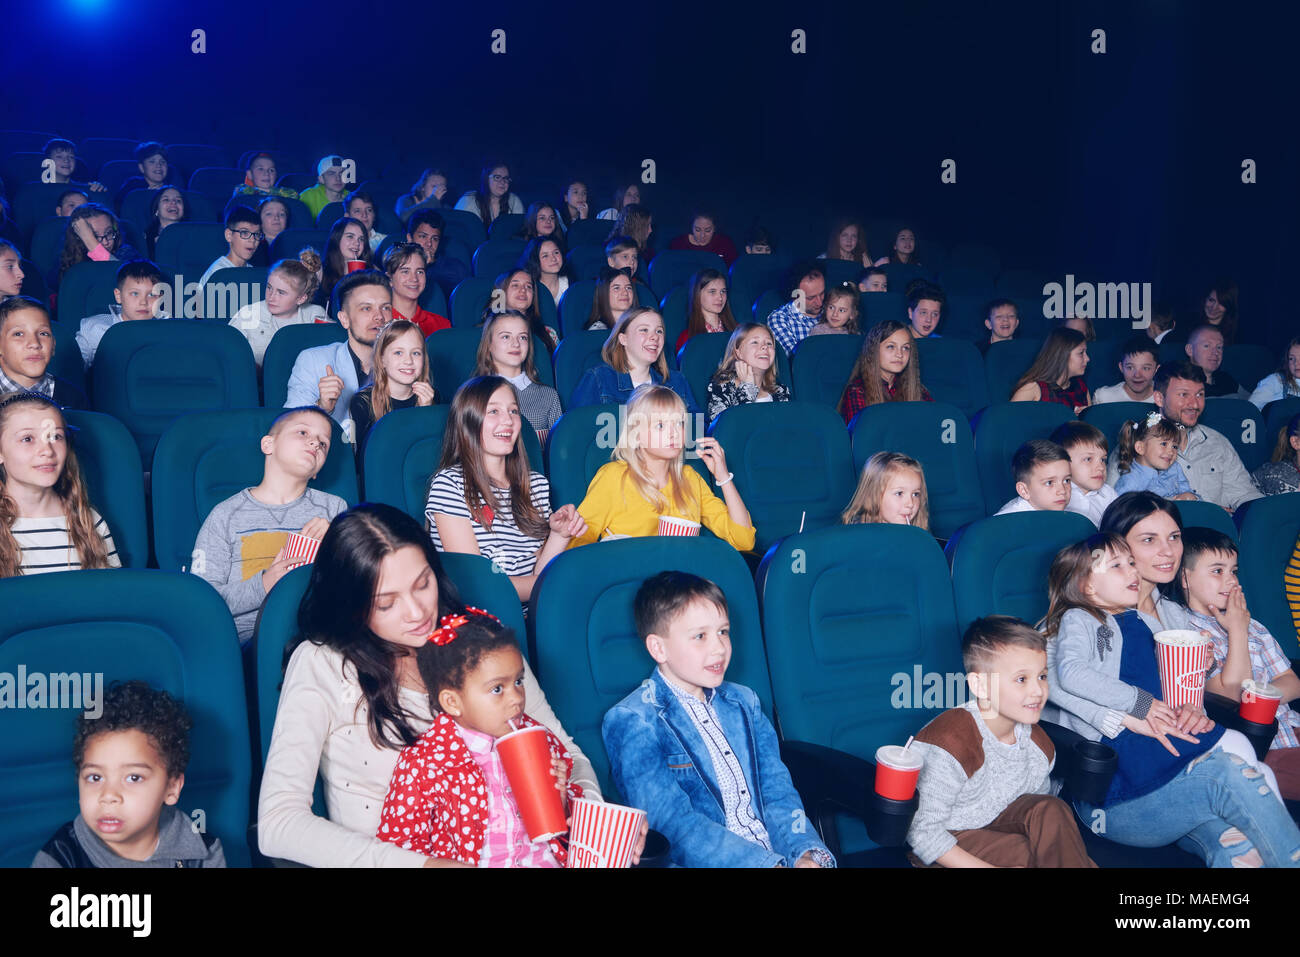 frontview of young exited people watching interesting movie in cinema hall. Boys and girls look very emotional and happy. Models wearing colorful clothes,eating popcorn, drinking fizzy drinks. Stock Photo